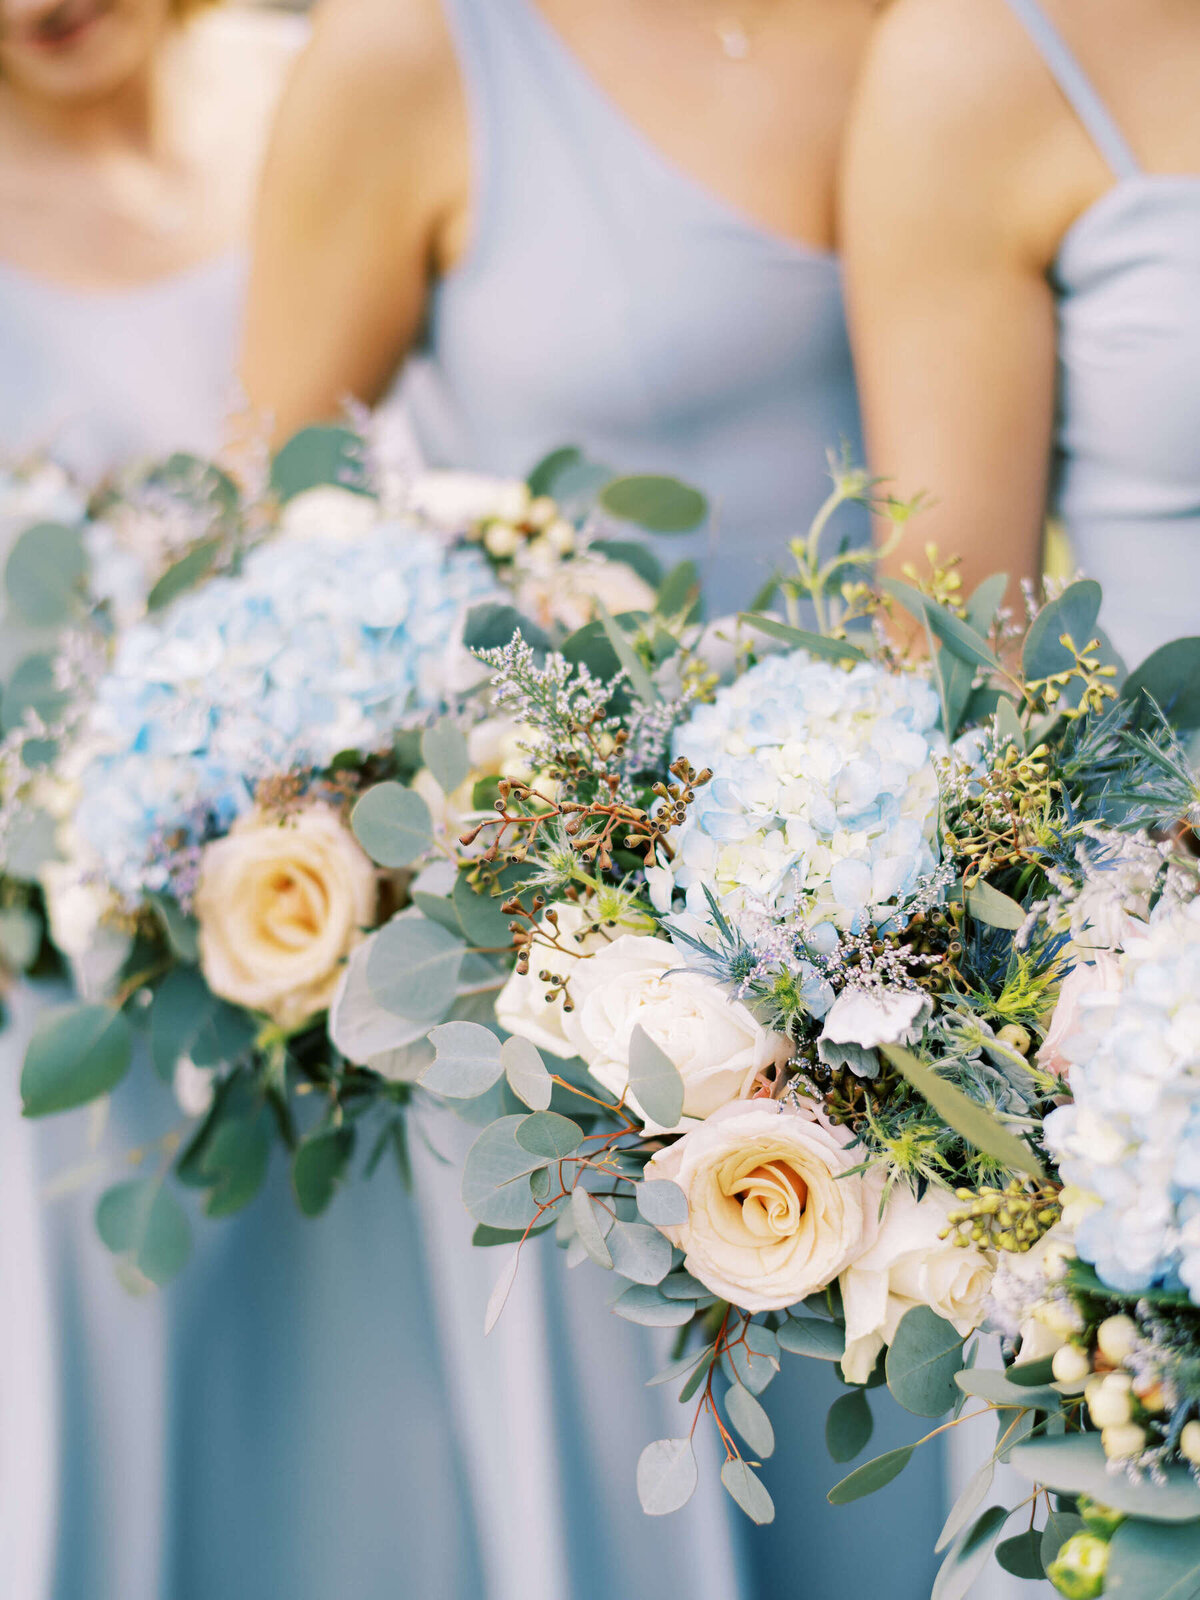 Blue hydrangea bridesmaid bouquets for central Texas wedding at Canyonwood Ridge